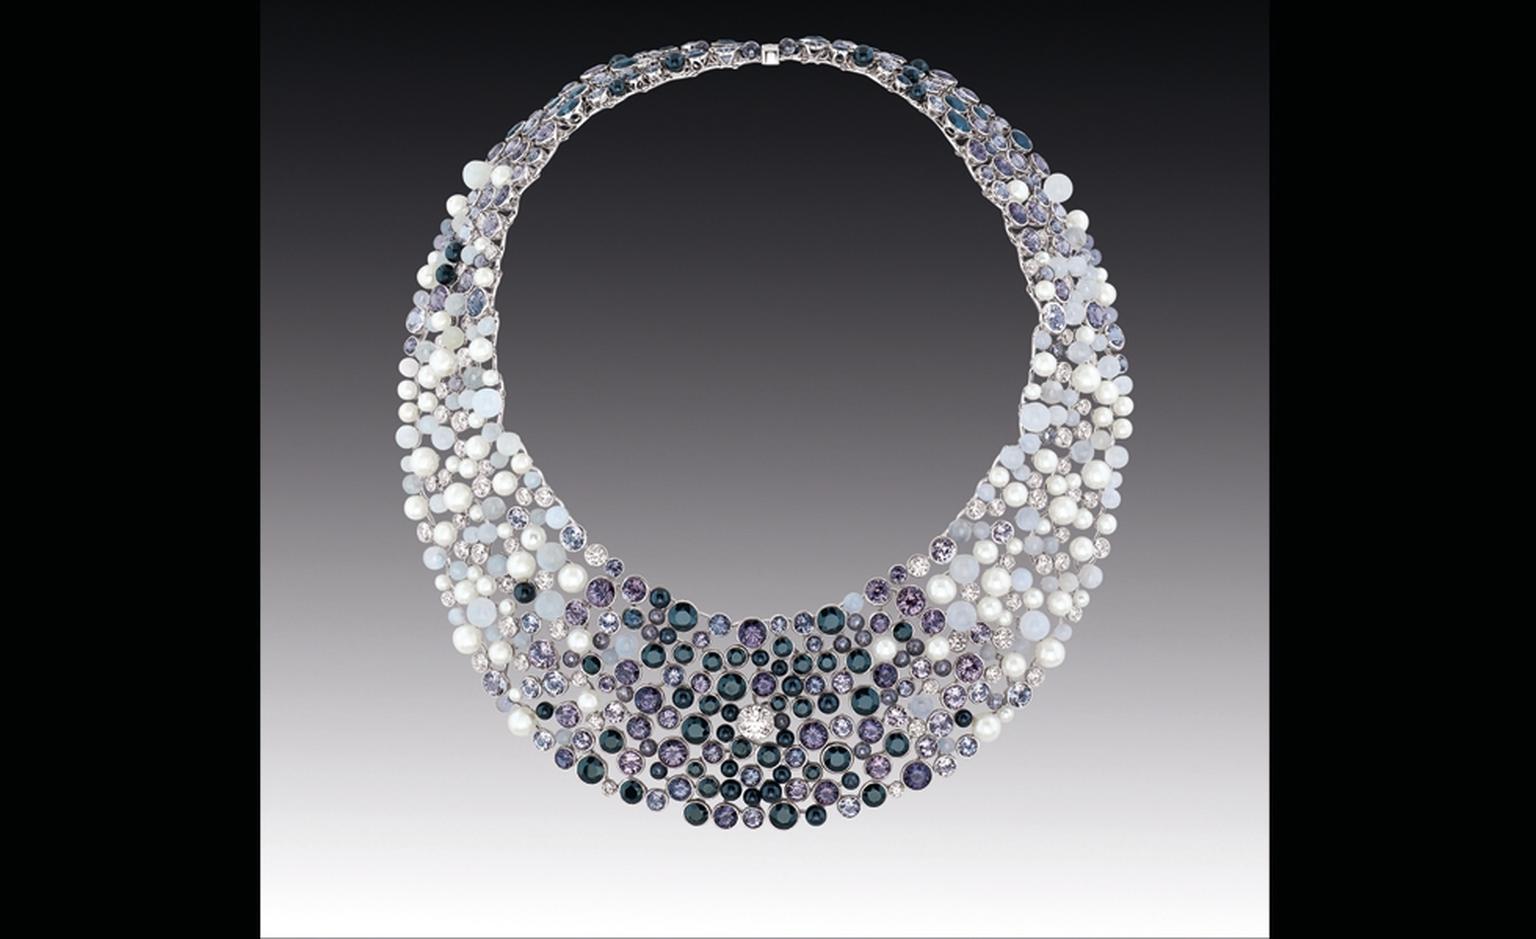 Chanel Contrastes collection: Collier Perle de Rosee. Necklace in white gold, diamonds, black and grey spinels, moon stones and pearls.